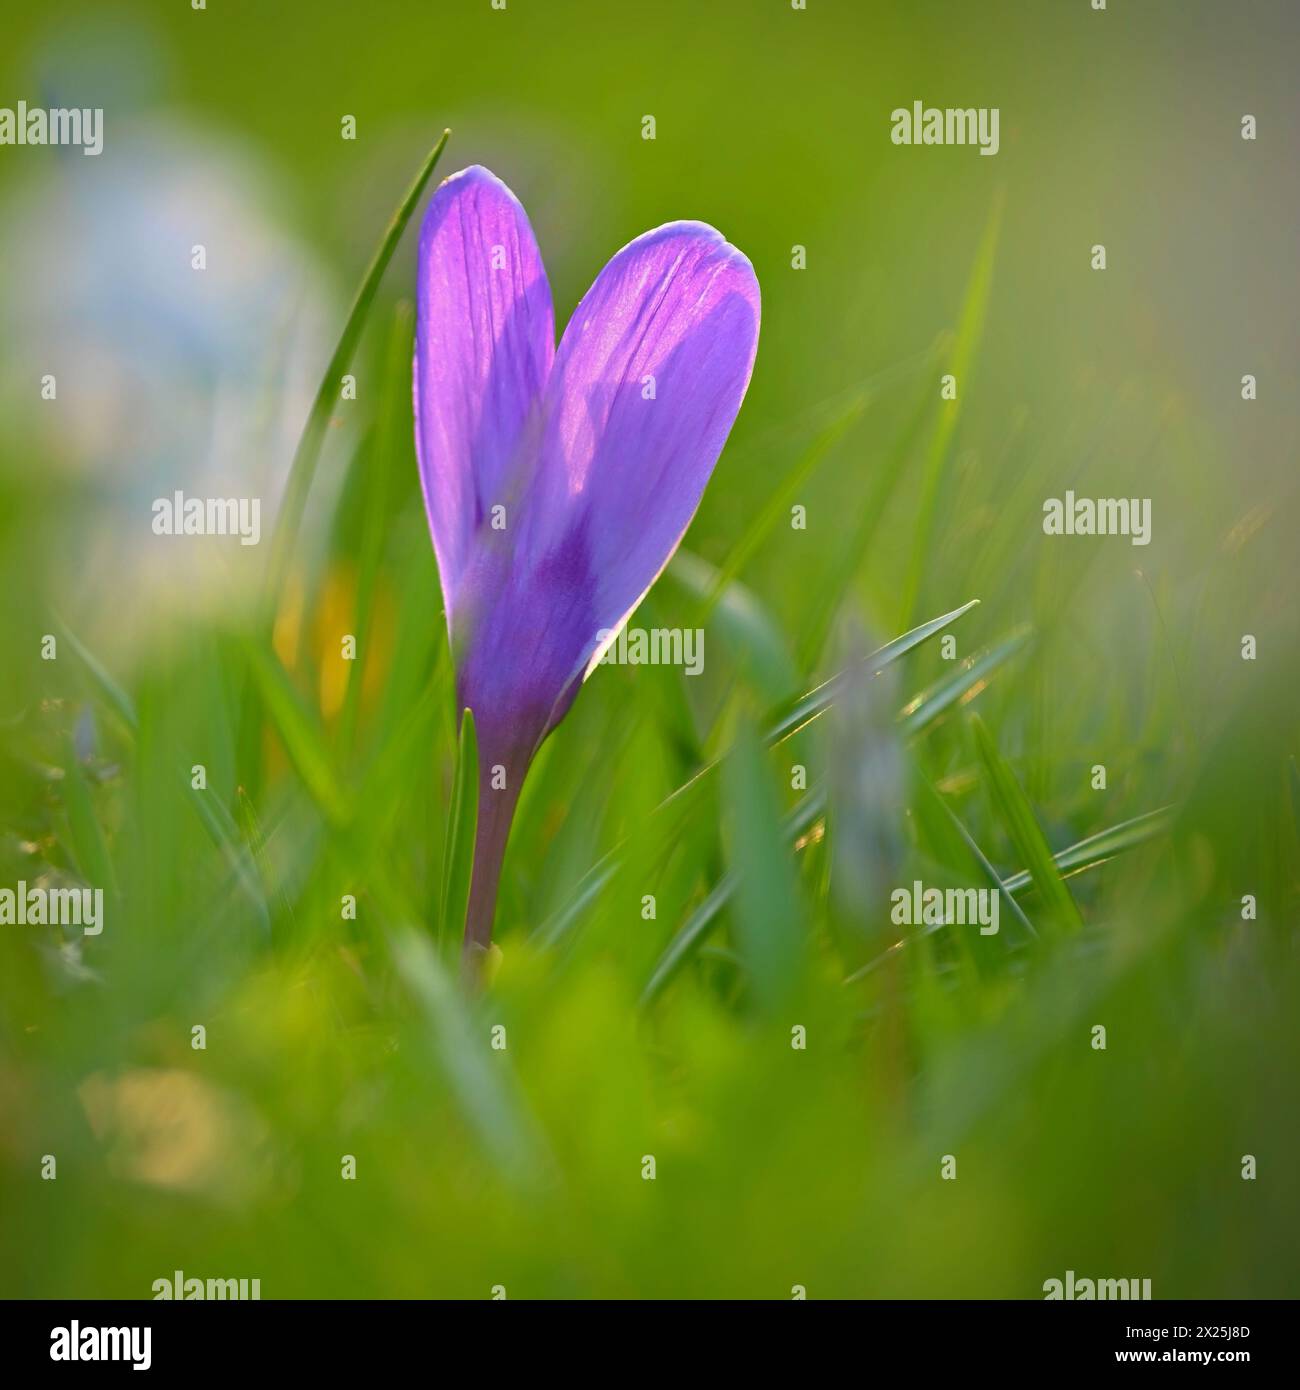 Spring background with flowers. Nature and delicate photo with details of blooming colorful crocuses in spring time.(Crocus vernus) Stock Photo